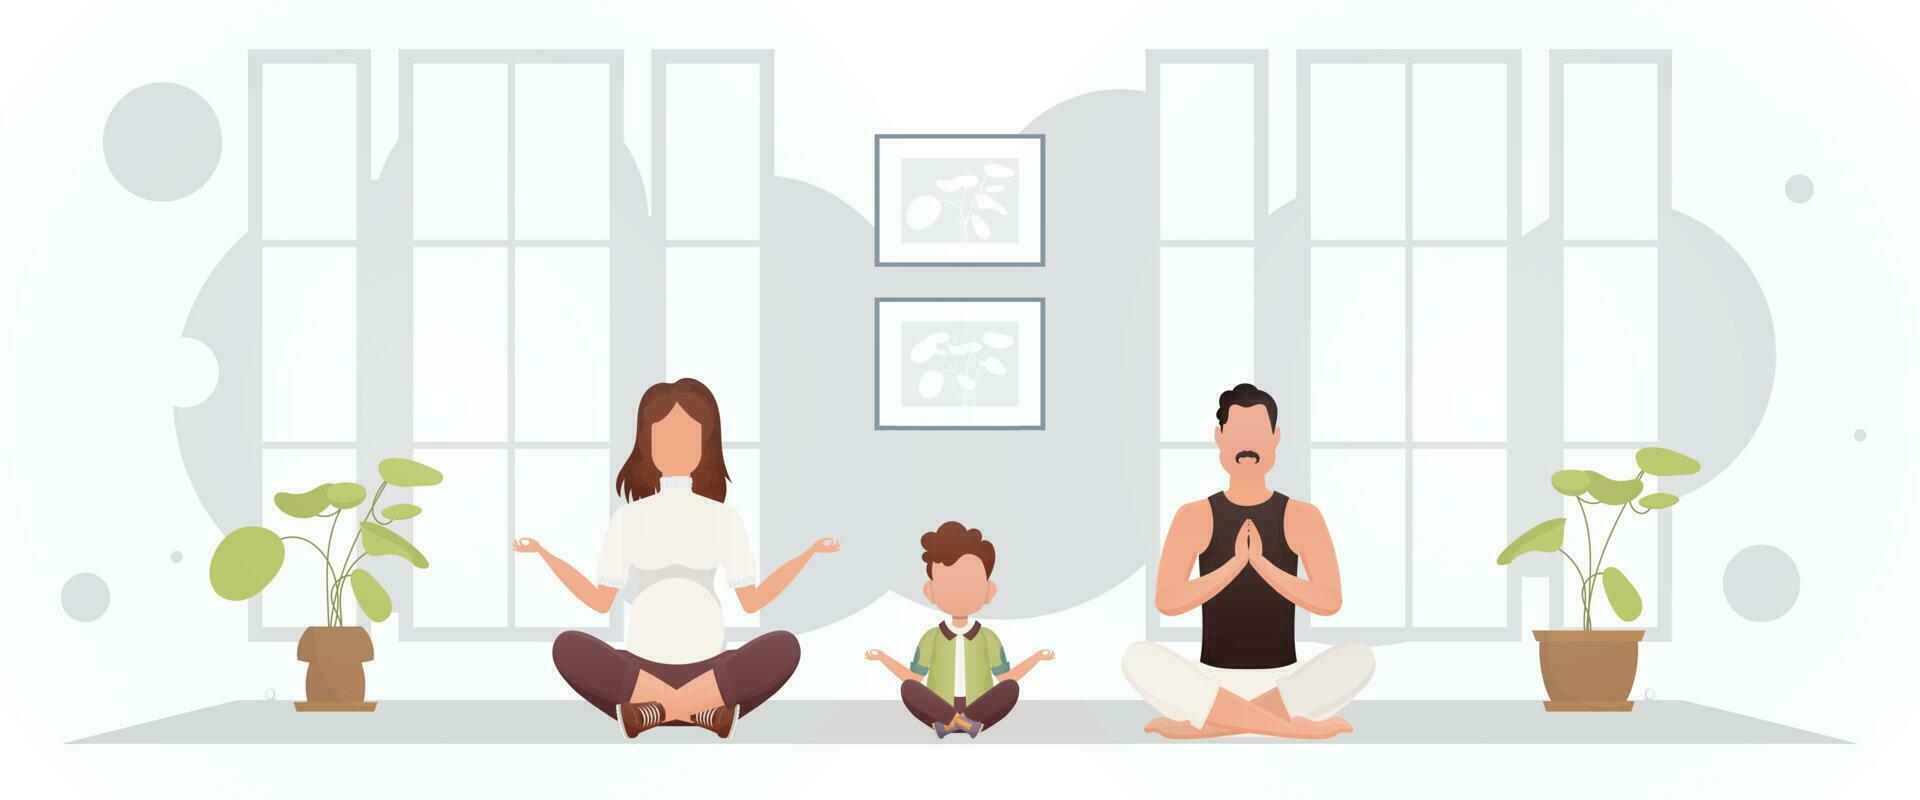 Husband and wife with an adorable baby are sitting in a lotus position in a room. Yoga. Cartoon style. vector